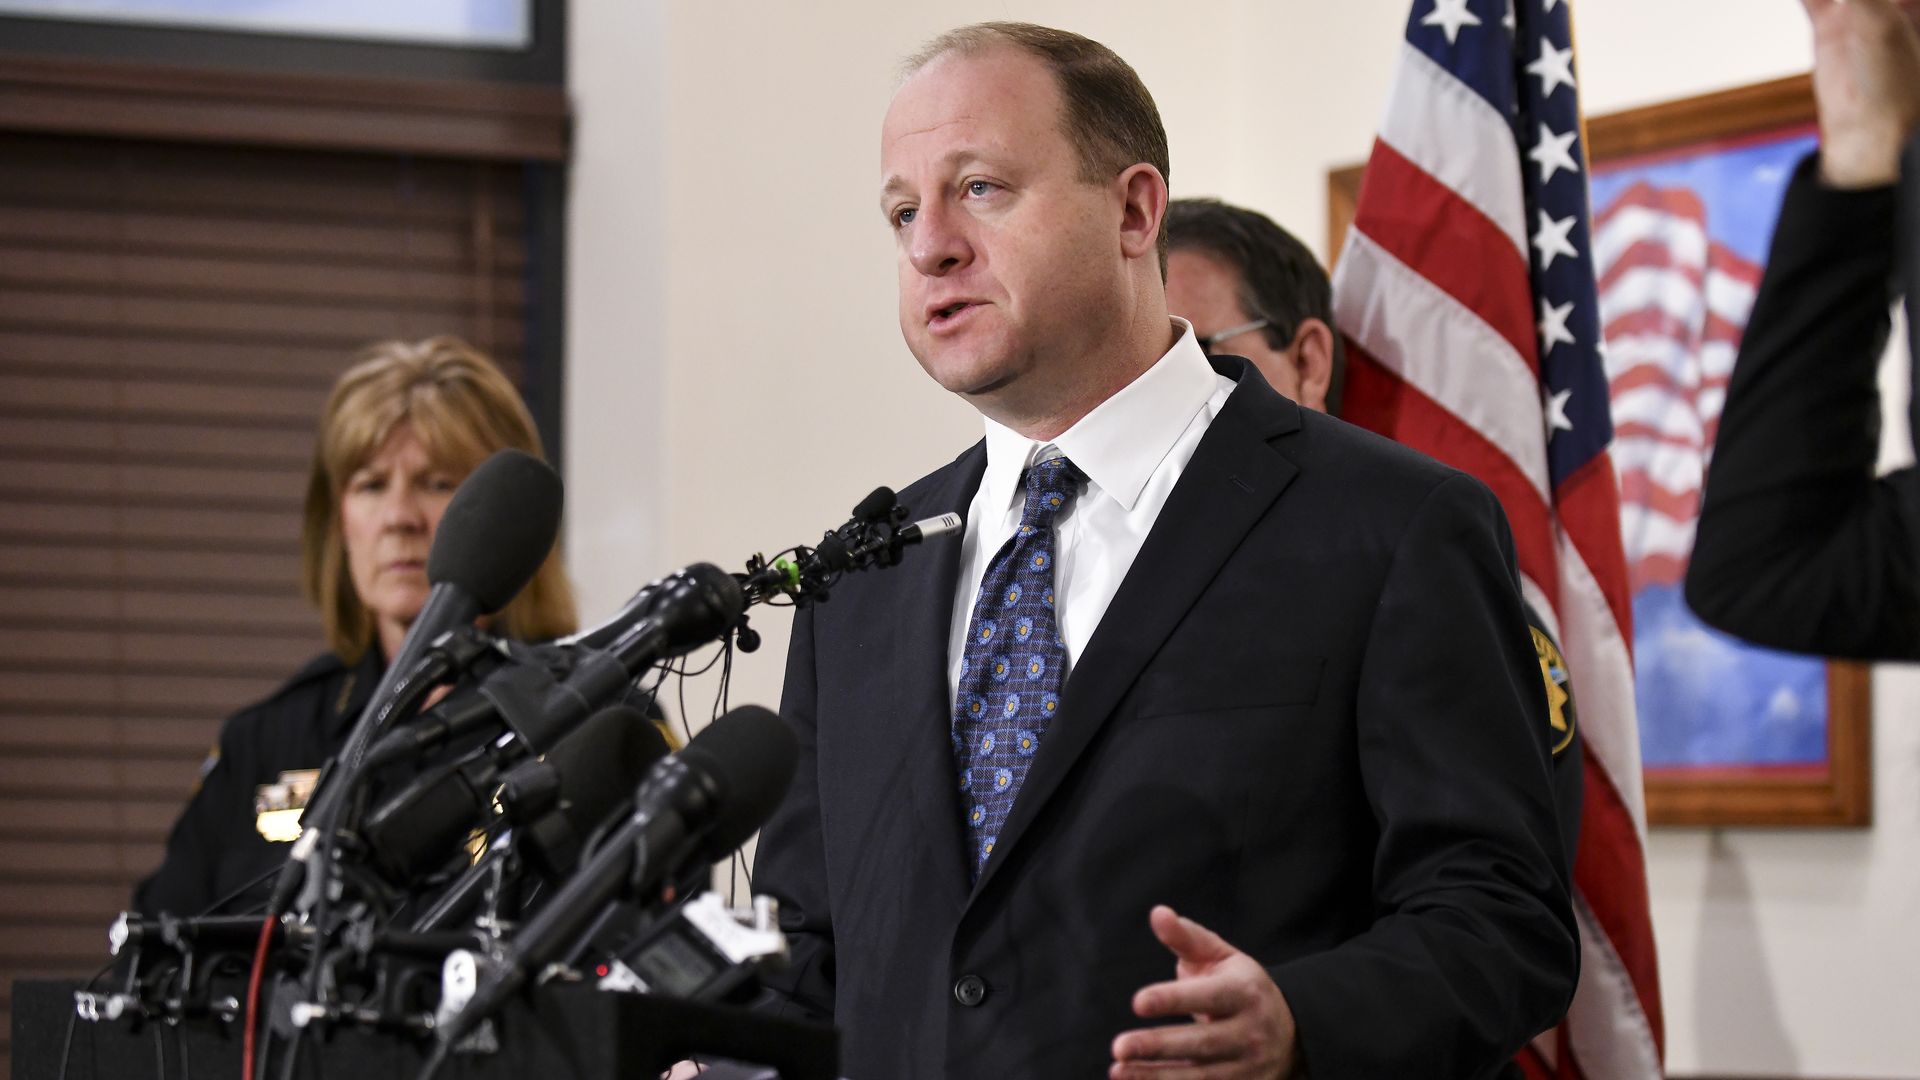 Colorado governor Jared Polis speaks to the media regarding the shooting at STEM School Highlands Ranch during a press conference 